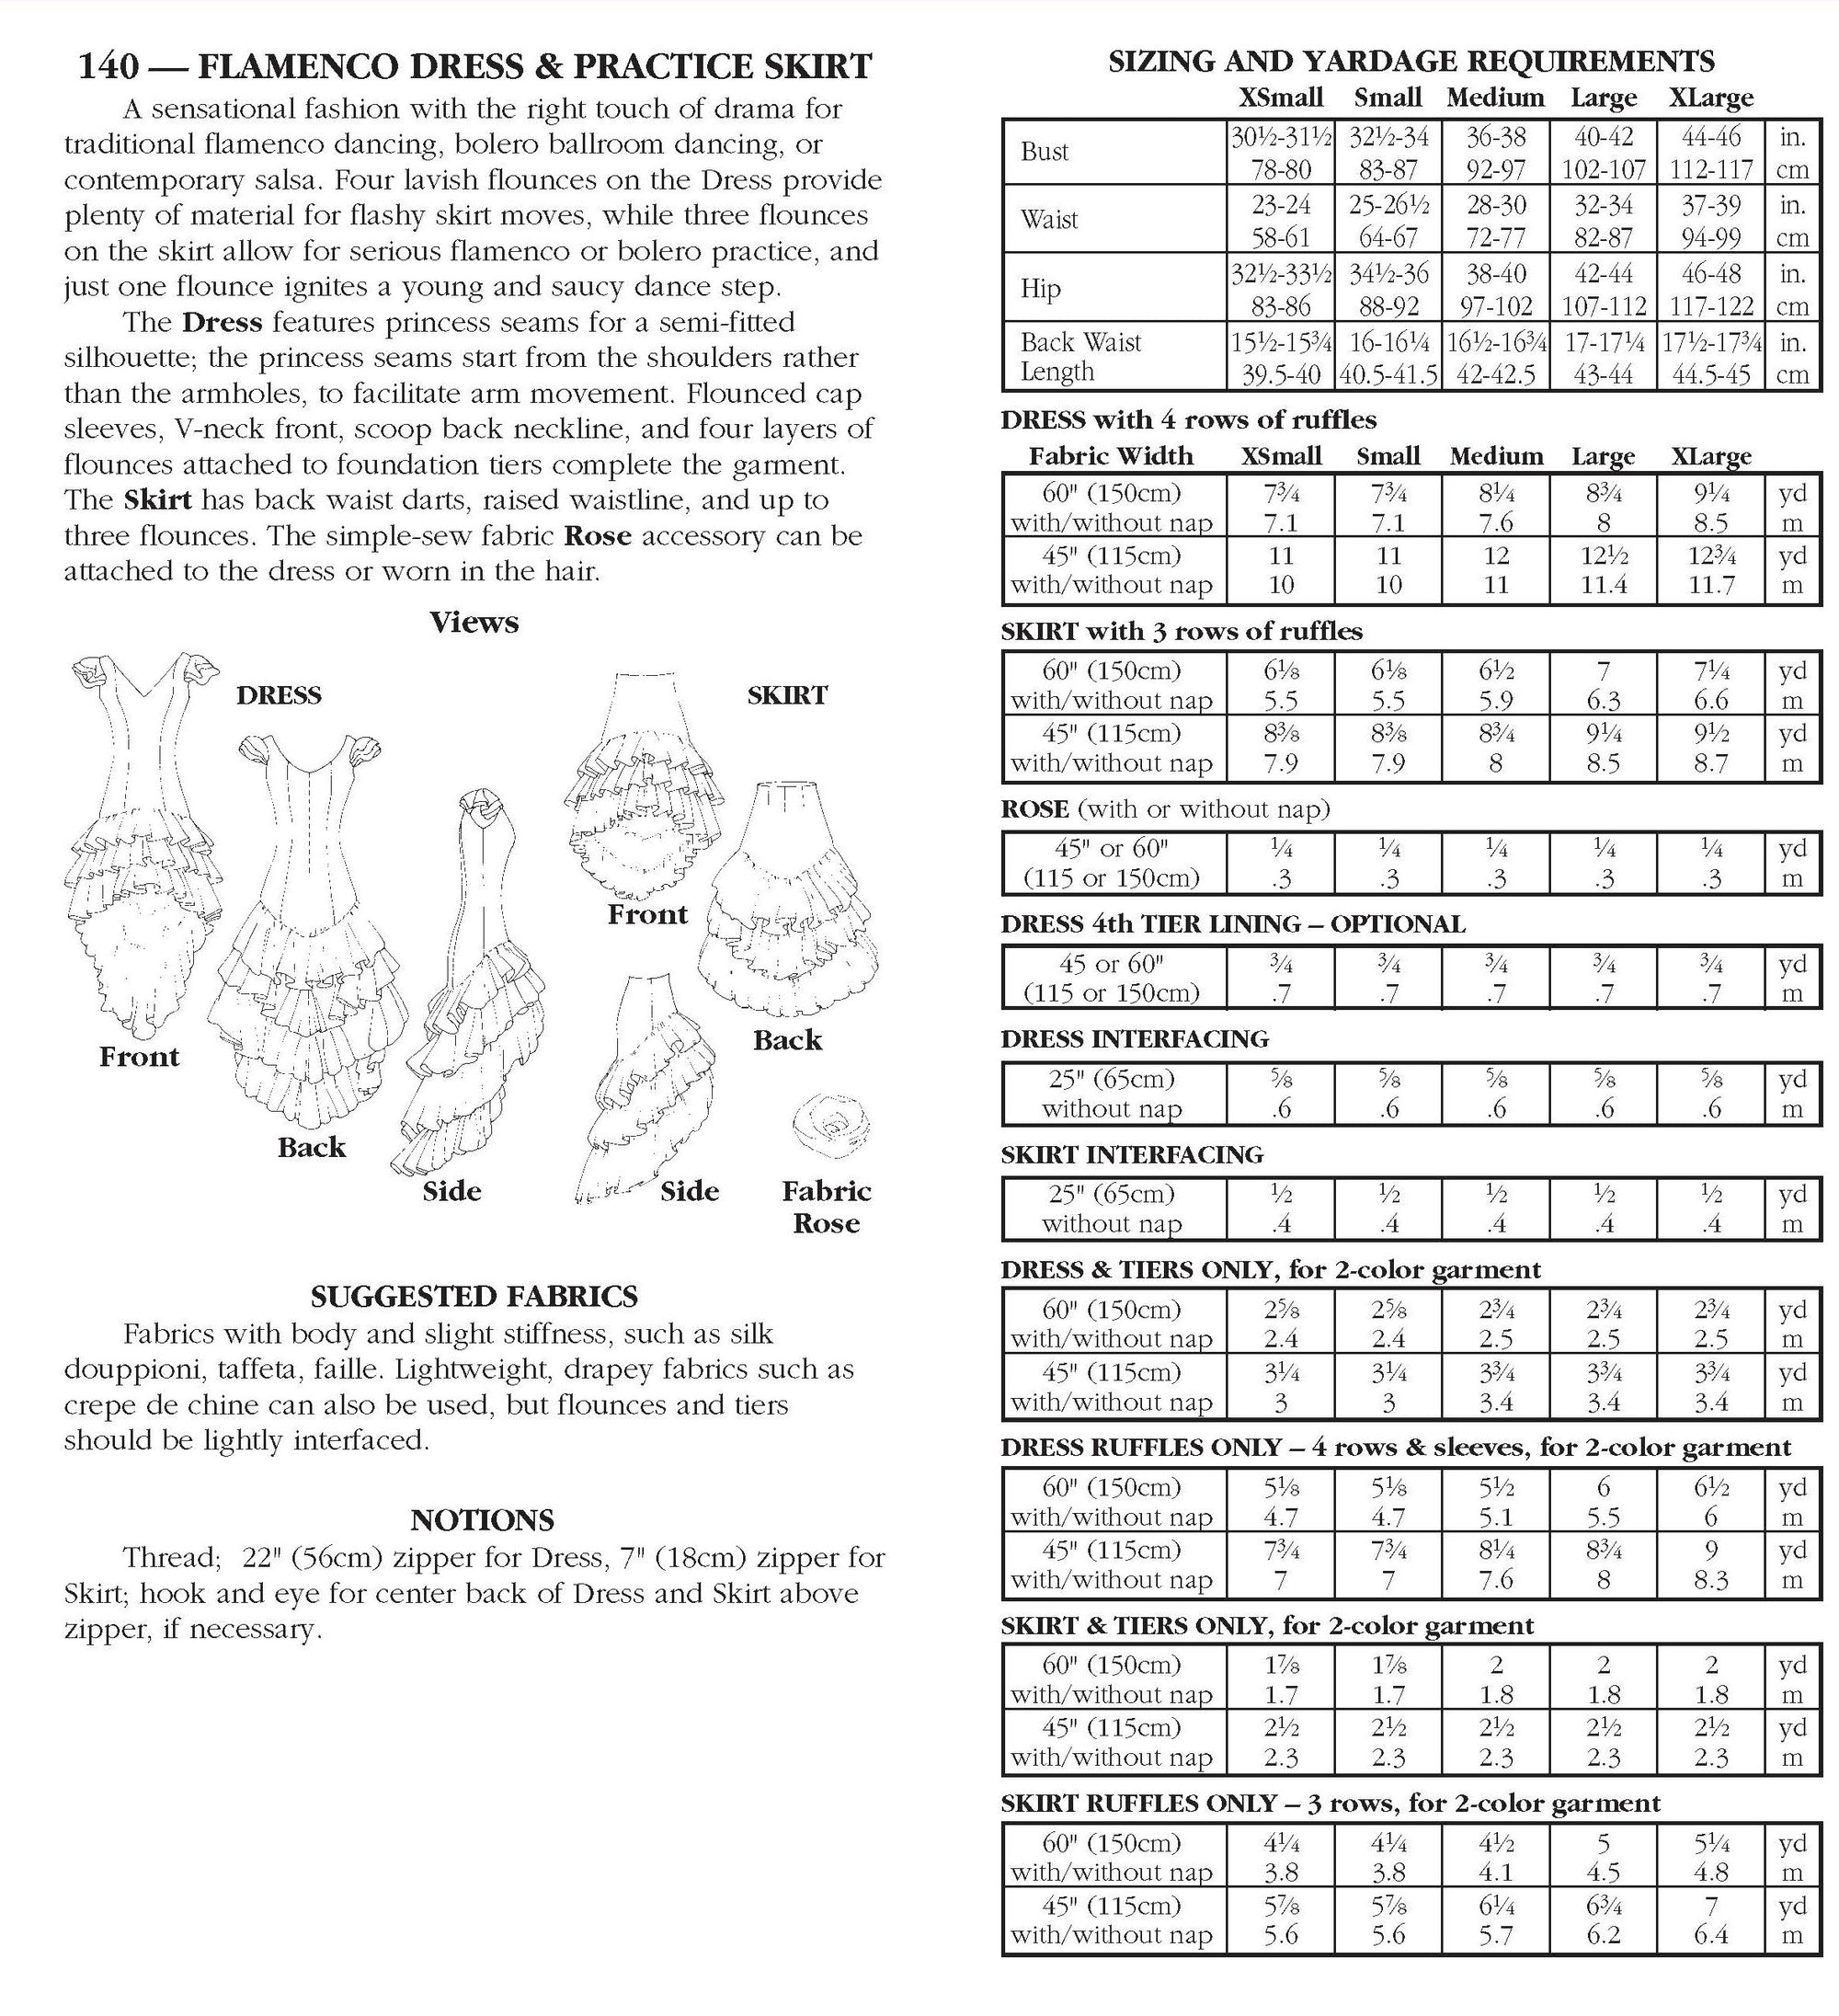 Photo of back of pattern cover.  Cover shows description of pattern, views, fabric suggestions, and size and yardage charts.